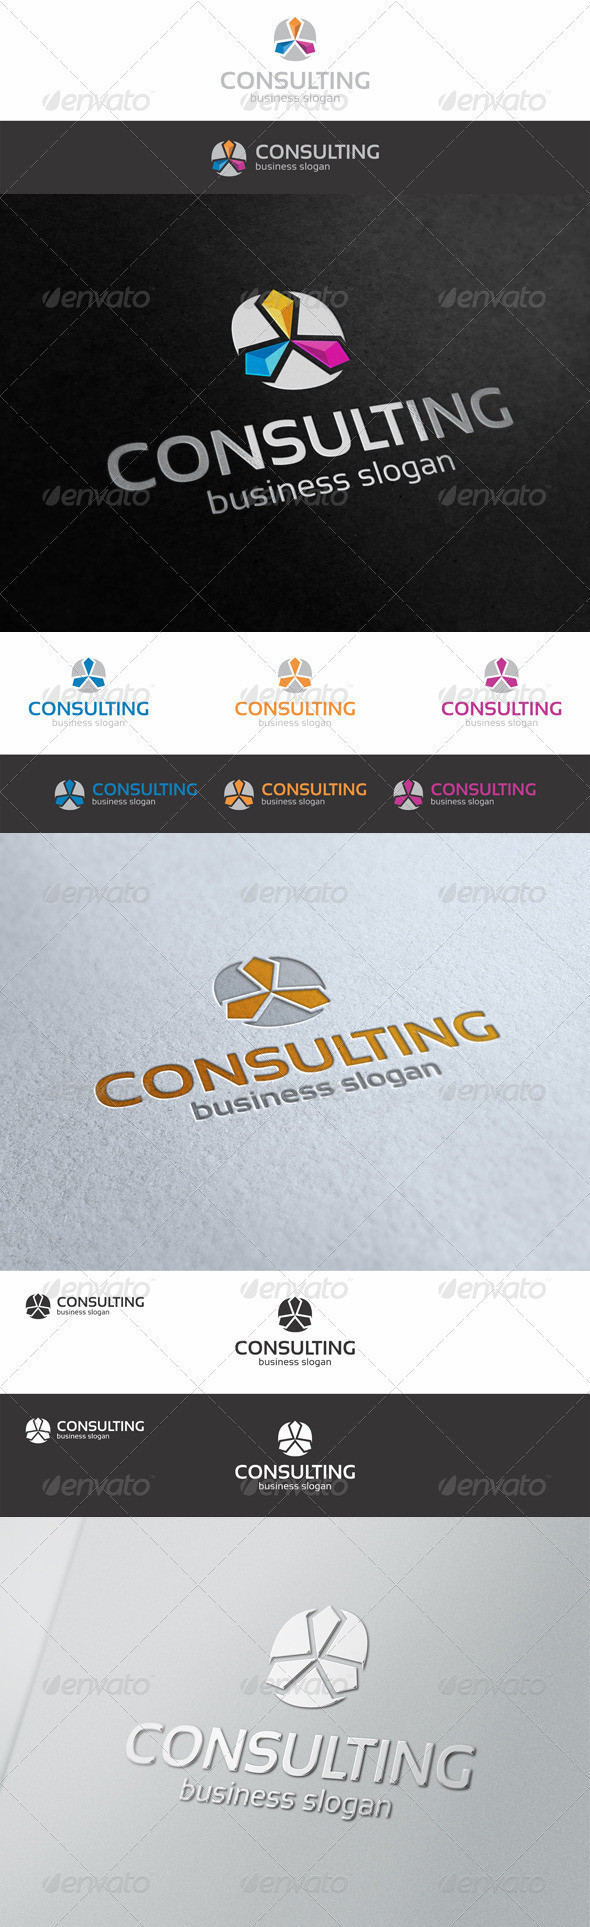 Consulting 20construction 20logo 20template 1